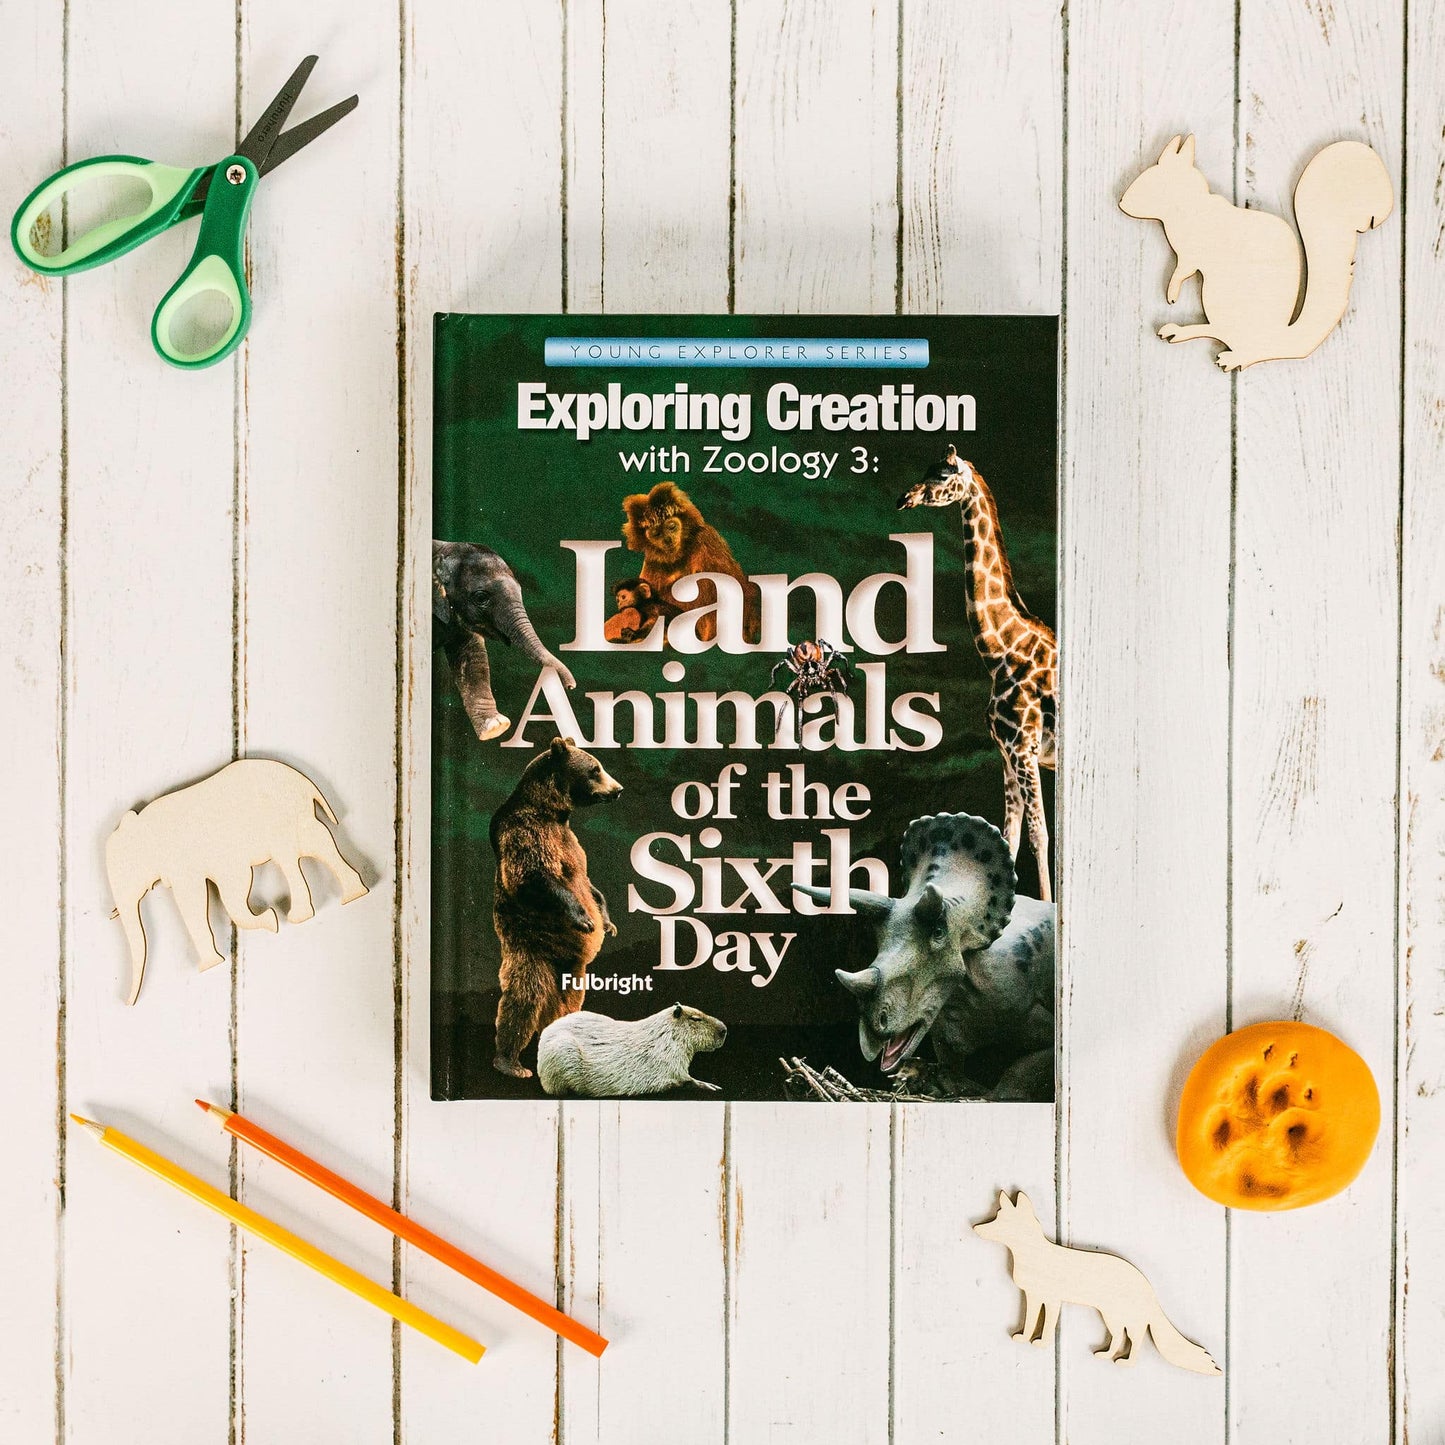 Young Explorer Series - Exploring Creation with Zoology 3: Land Animals of the sixth day